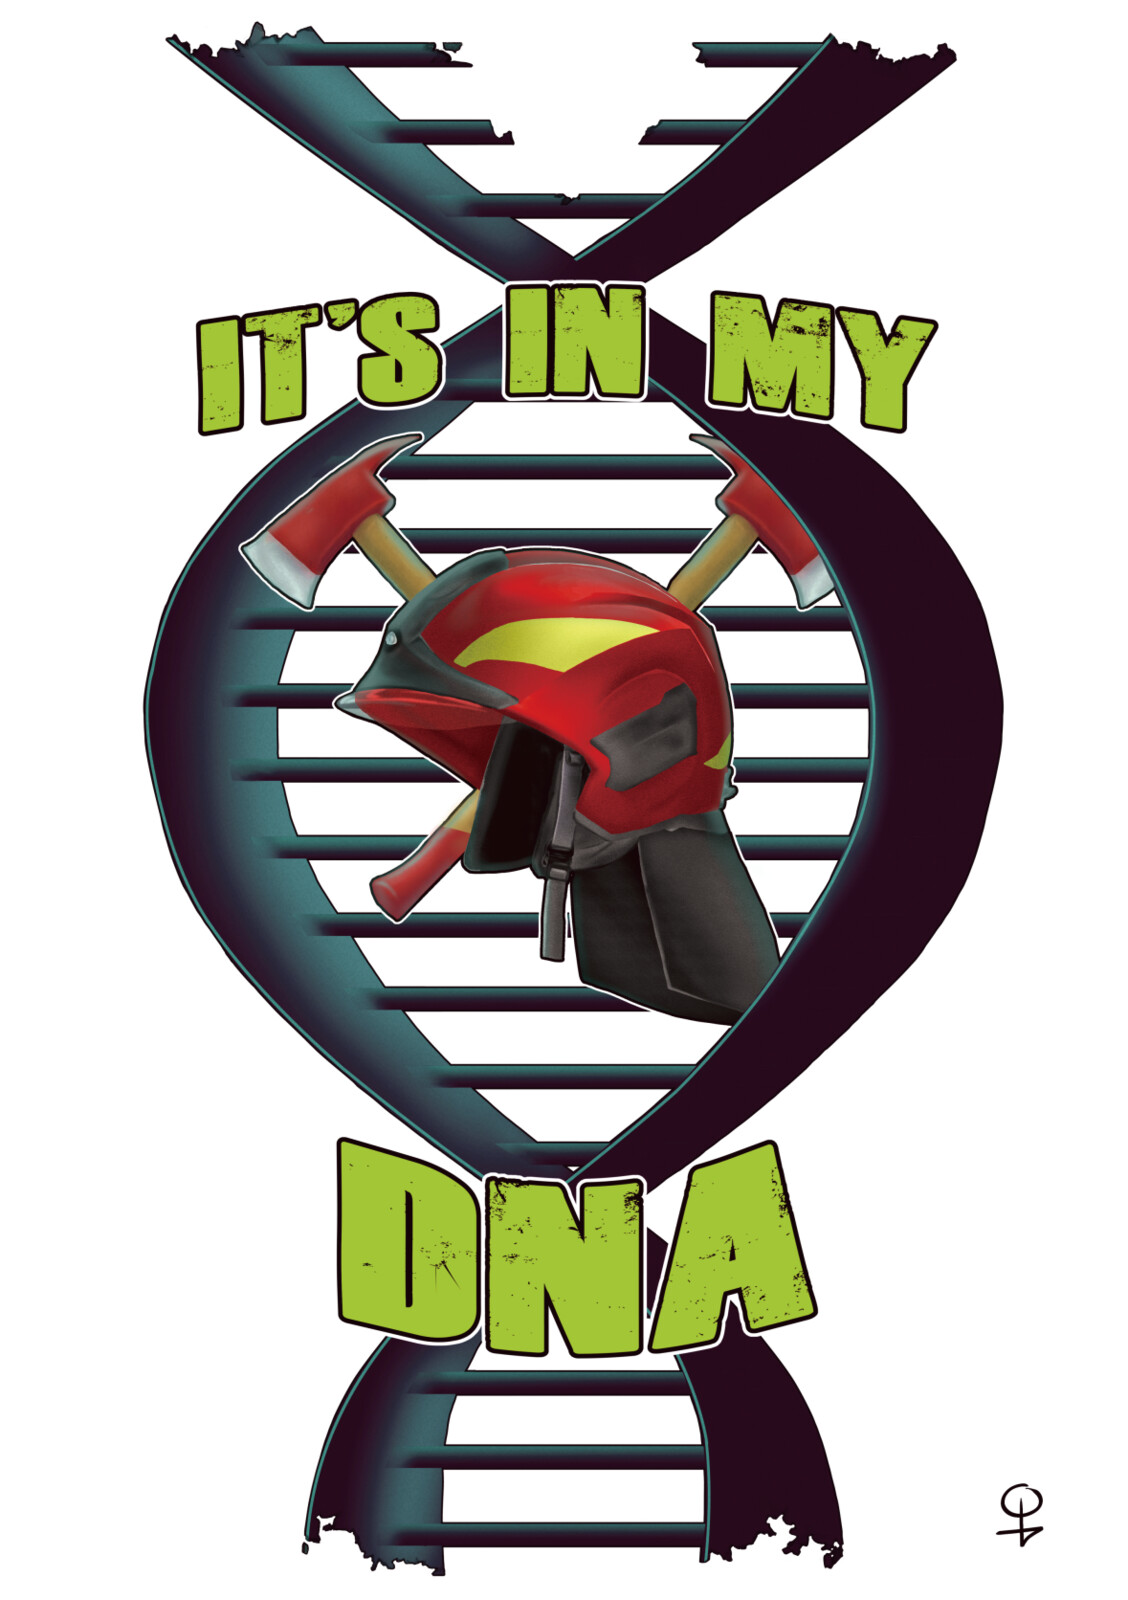 Second version with the DNA strand (red helmet)